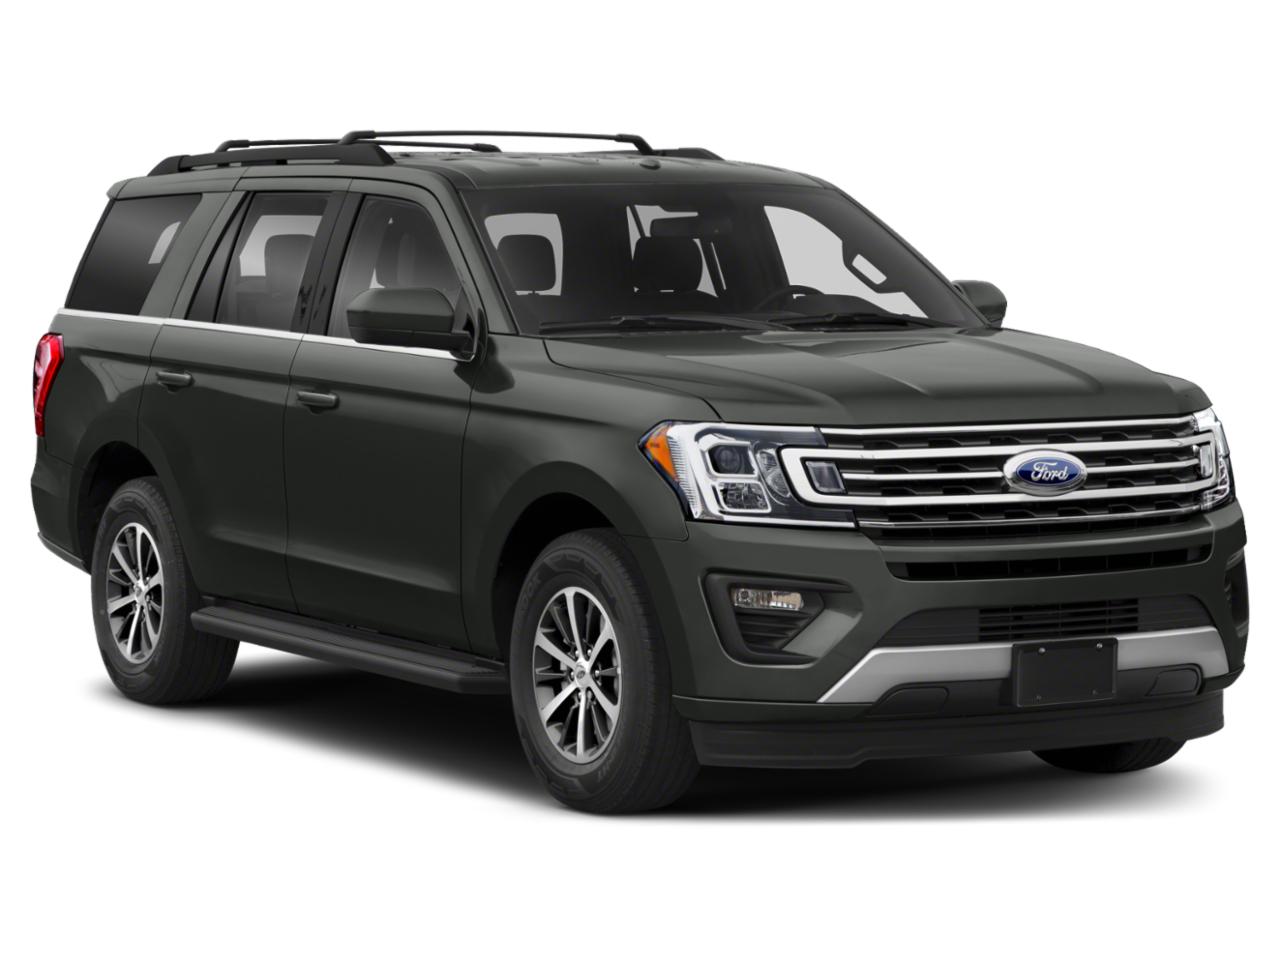 2018 Ford Expedition Vehicle Photo in PEMBROKE PINES, FL 33024-6534